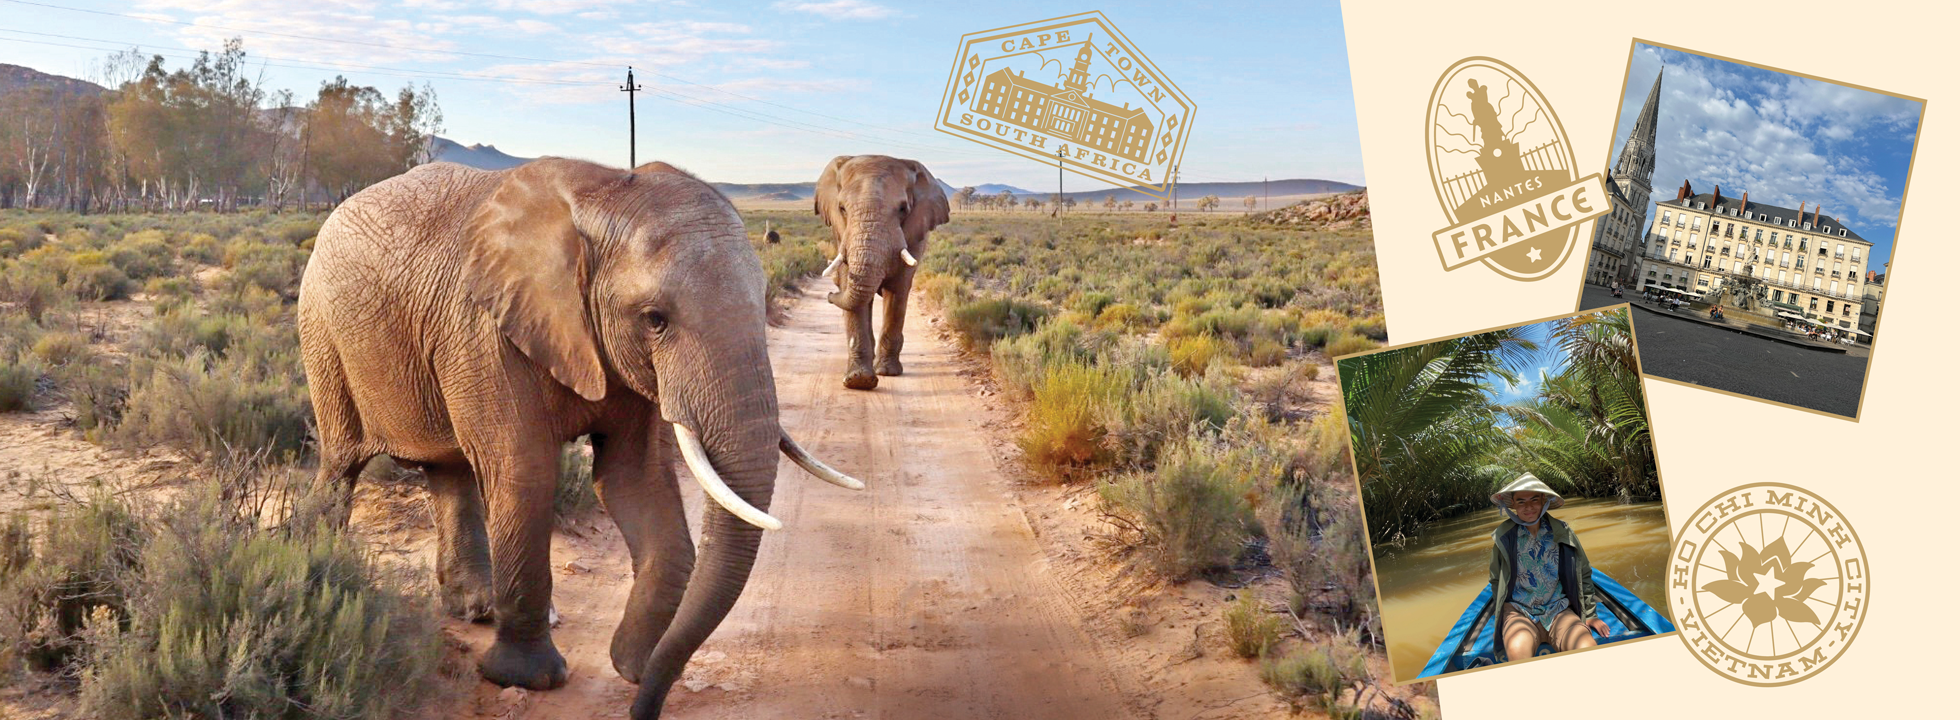 Two elephants walk down a dirt path where green native desert plants abound to the left and right; trees and mountains in the distance give way to a blue partially-cloudy sky. On the right-hand side, golden stamp-inspired illustrations of "Cape Town, South Africa," "Nantes, France," "Ho Chi Minh City, Vietnam" and student-taken photographs against a tan background.